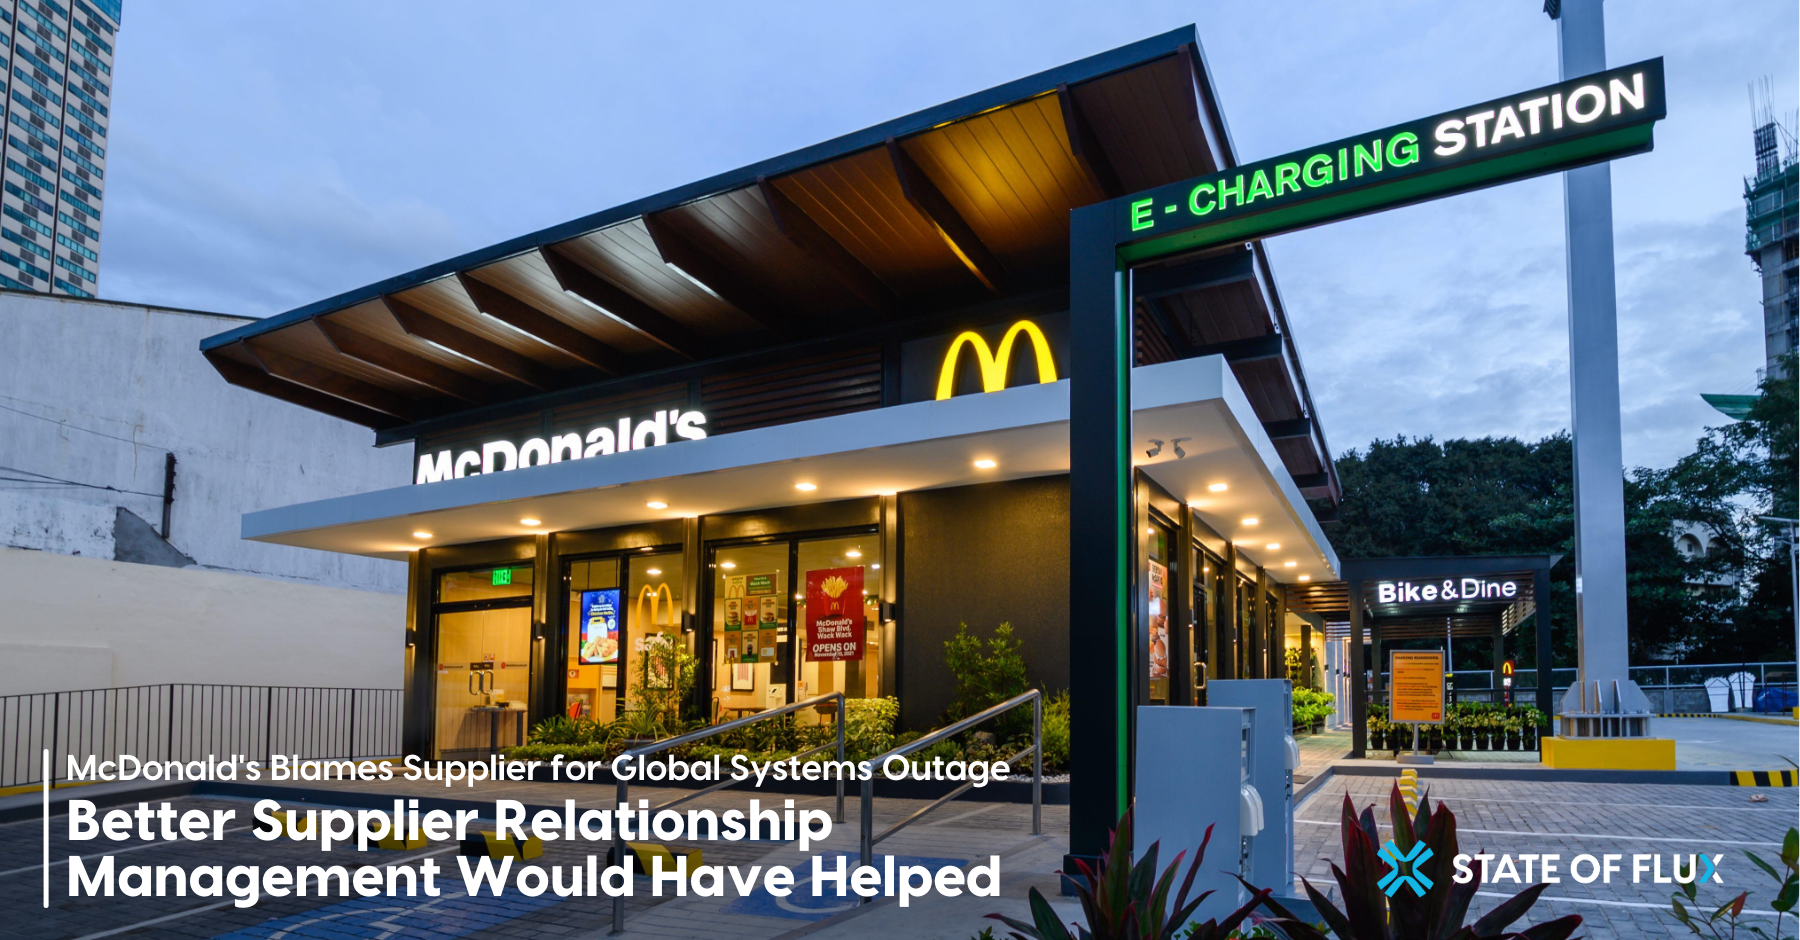 McDonald's Blames Supplier for Global Systems Outage - Better Supplier Relationship Management Would Have Helped